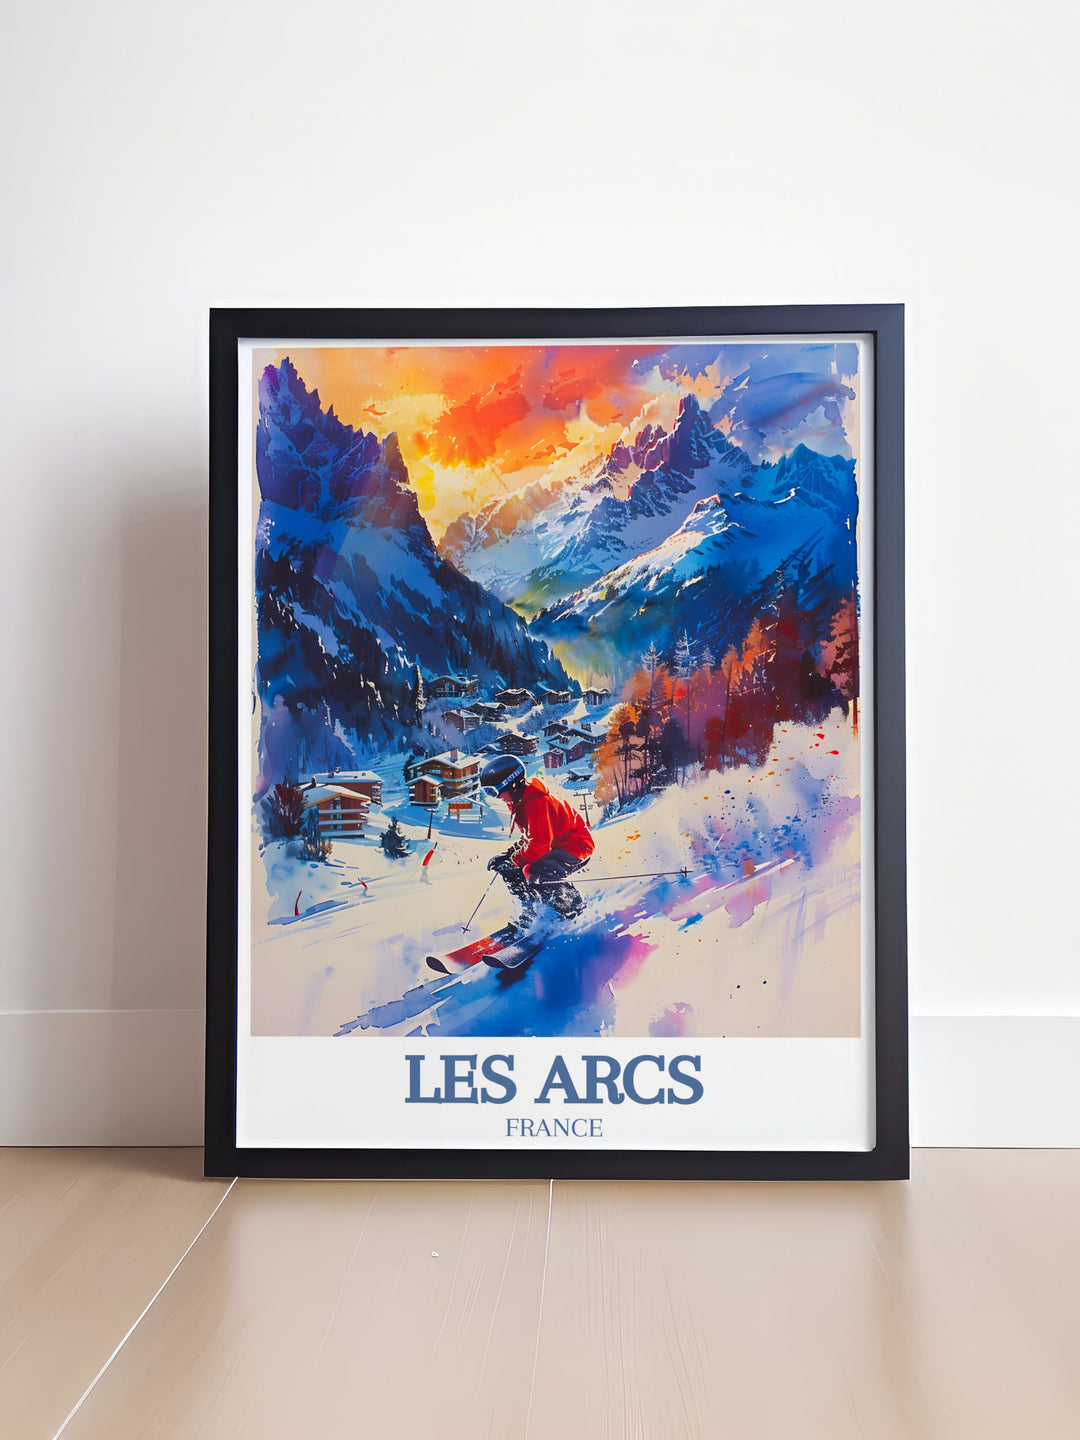 Paradiski ski area Mont Blanc wall art showcasing Les Arcs with vibrant snowboarding scenes a beautiful piece for any winter sports enthusiasts home decor collection